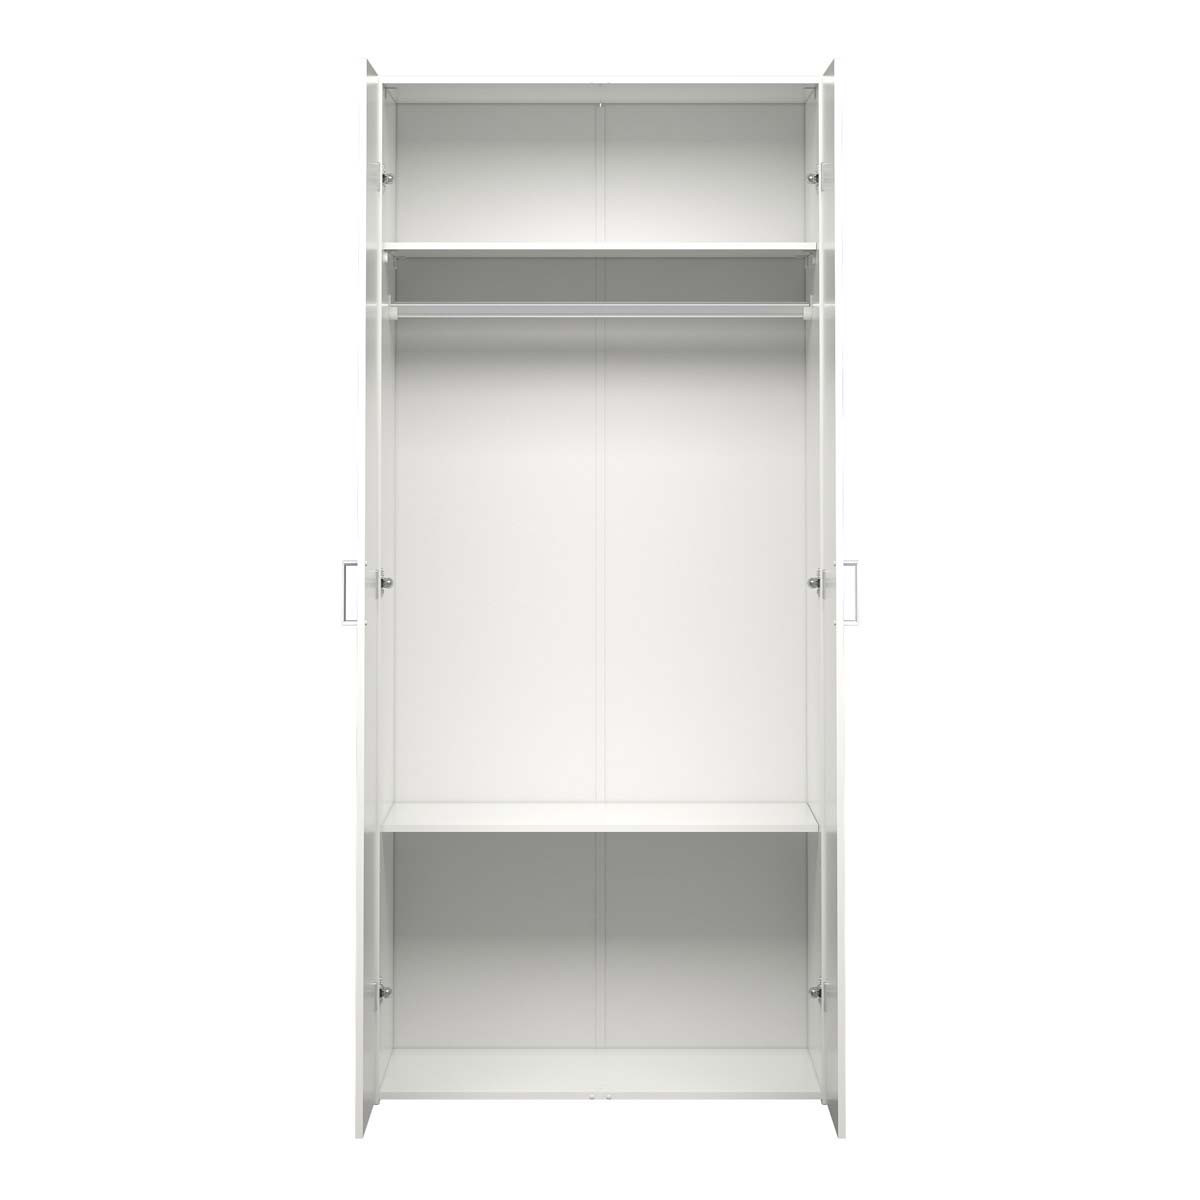 Rent a Closet Space 2drs white? Rent at KeyPro furniture rental!